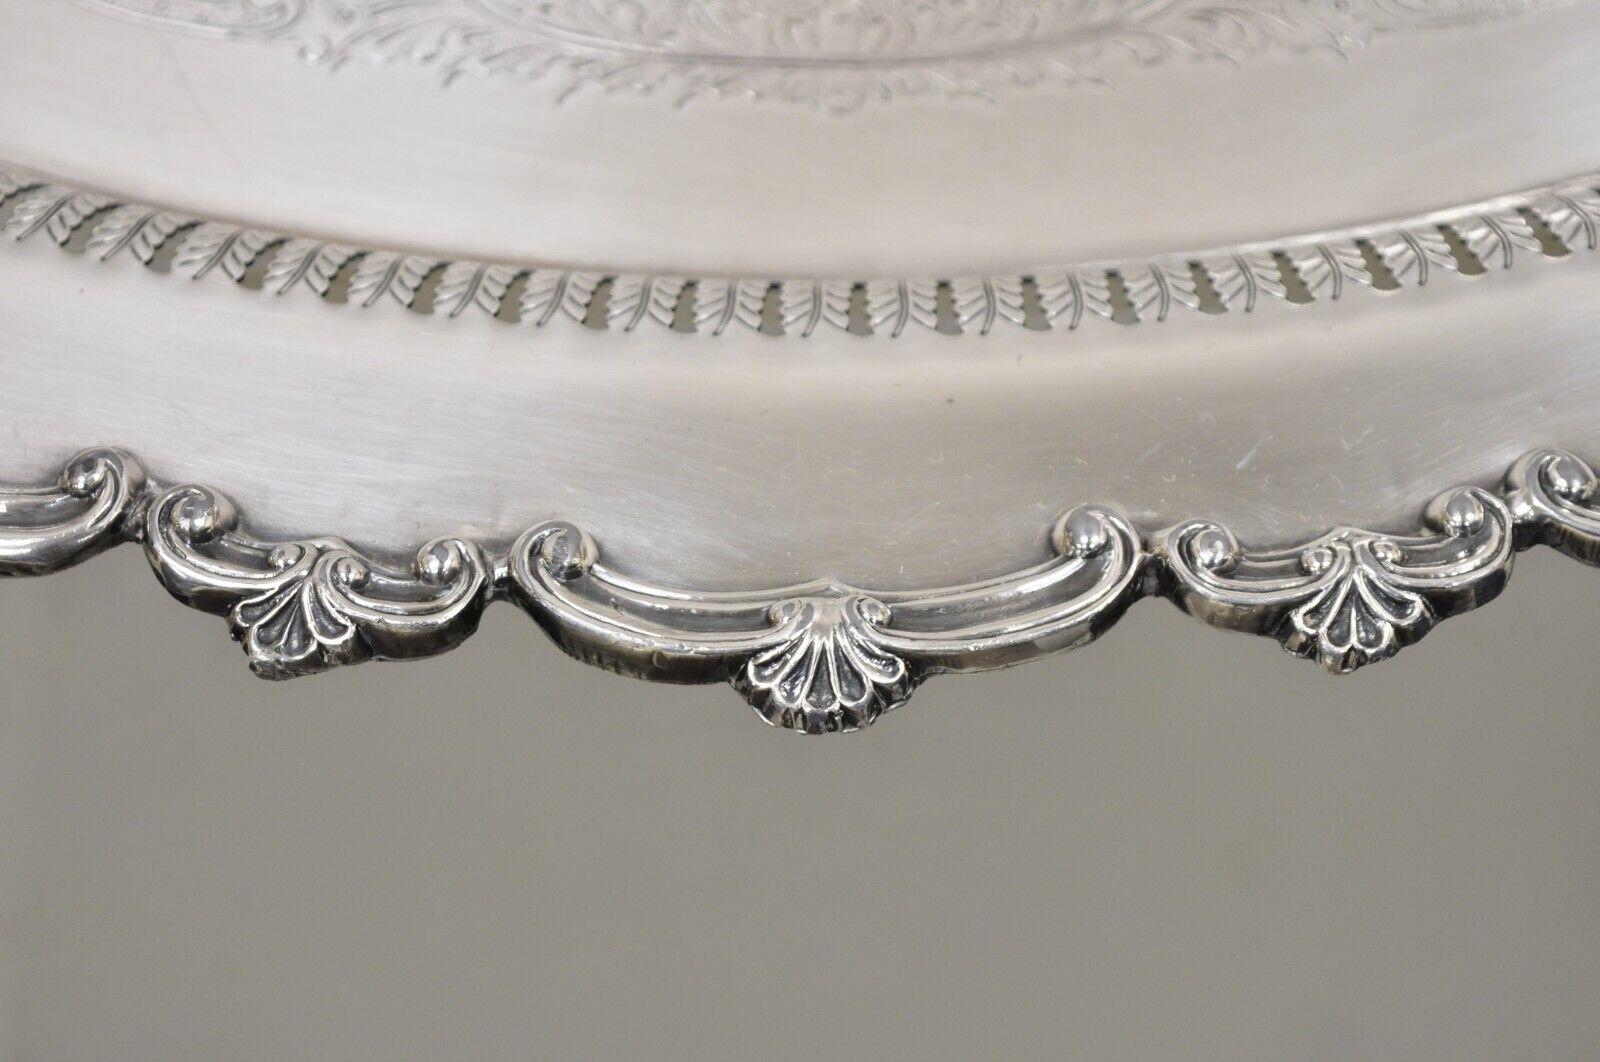 Antique Edwardian Silver Plated Oval Serving Platter Tray w/ Pierced Decoration 6